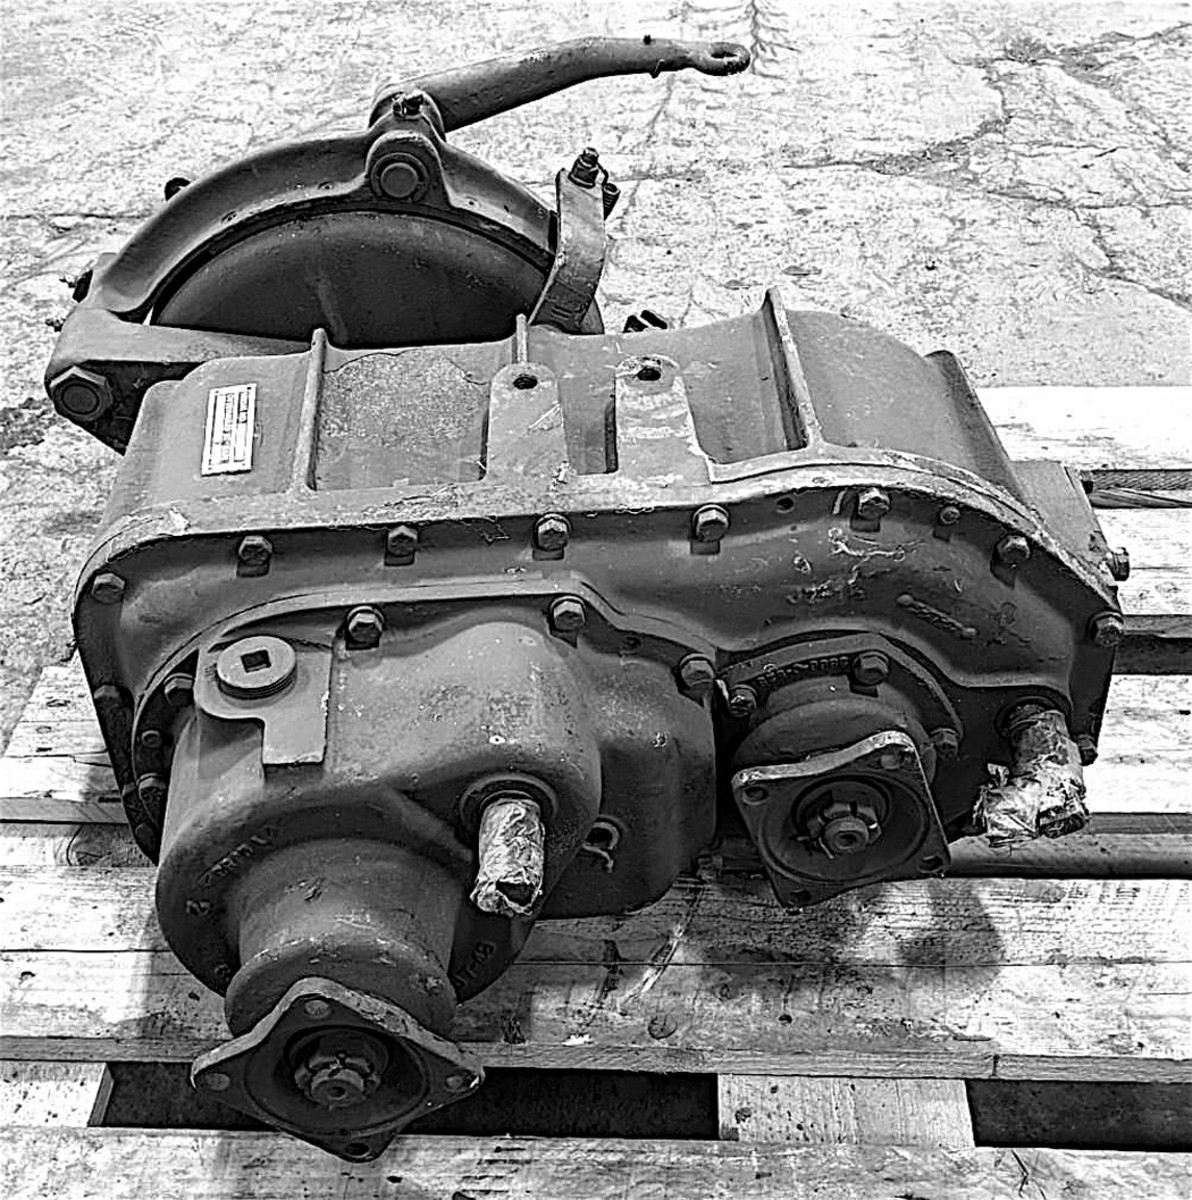 Early model M35 series transfer case with automatic sprag clutch. Used in Reo-engined gasoline-powered trucks and early LDS multifuel-engined vehicles.